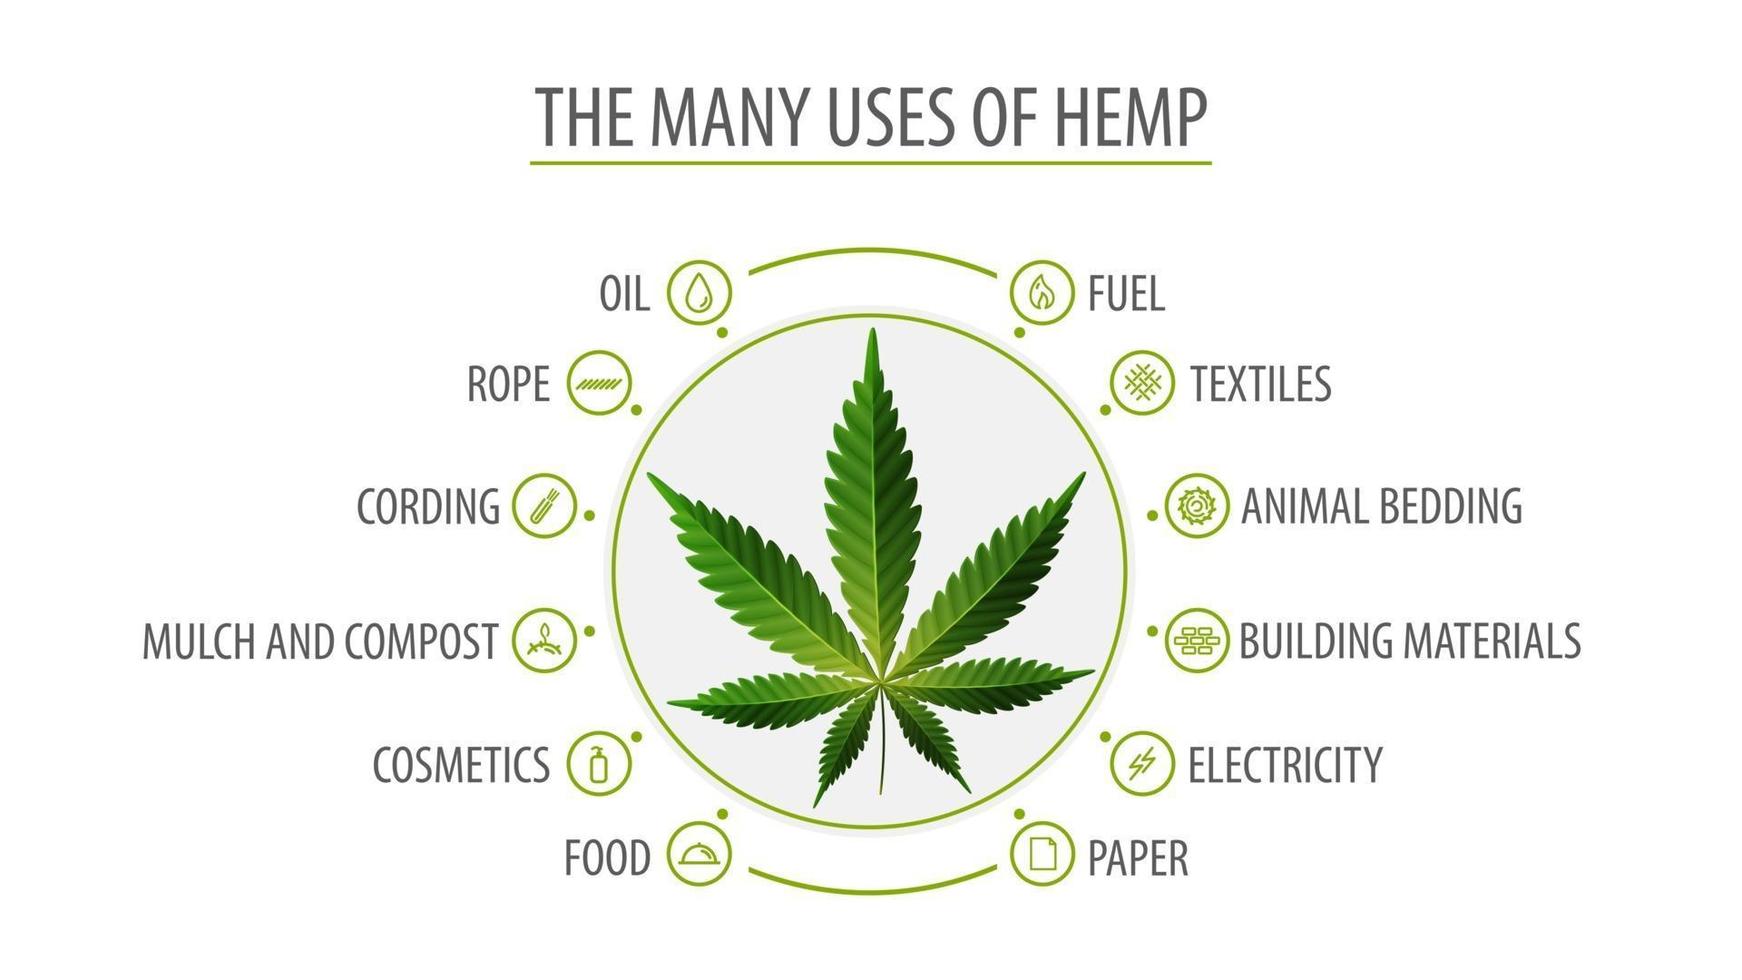 Many uses of hemp, white poster with infographic of uses of hemp and greenbush of hemp plant, top view vector